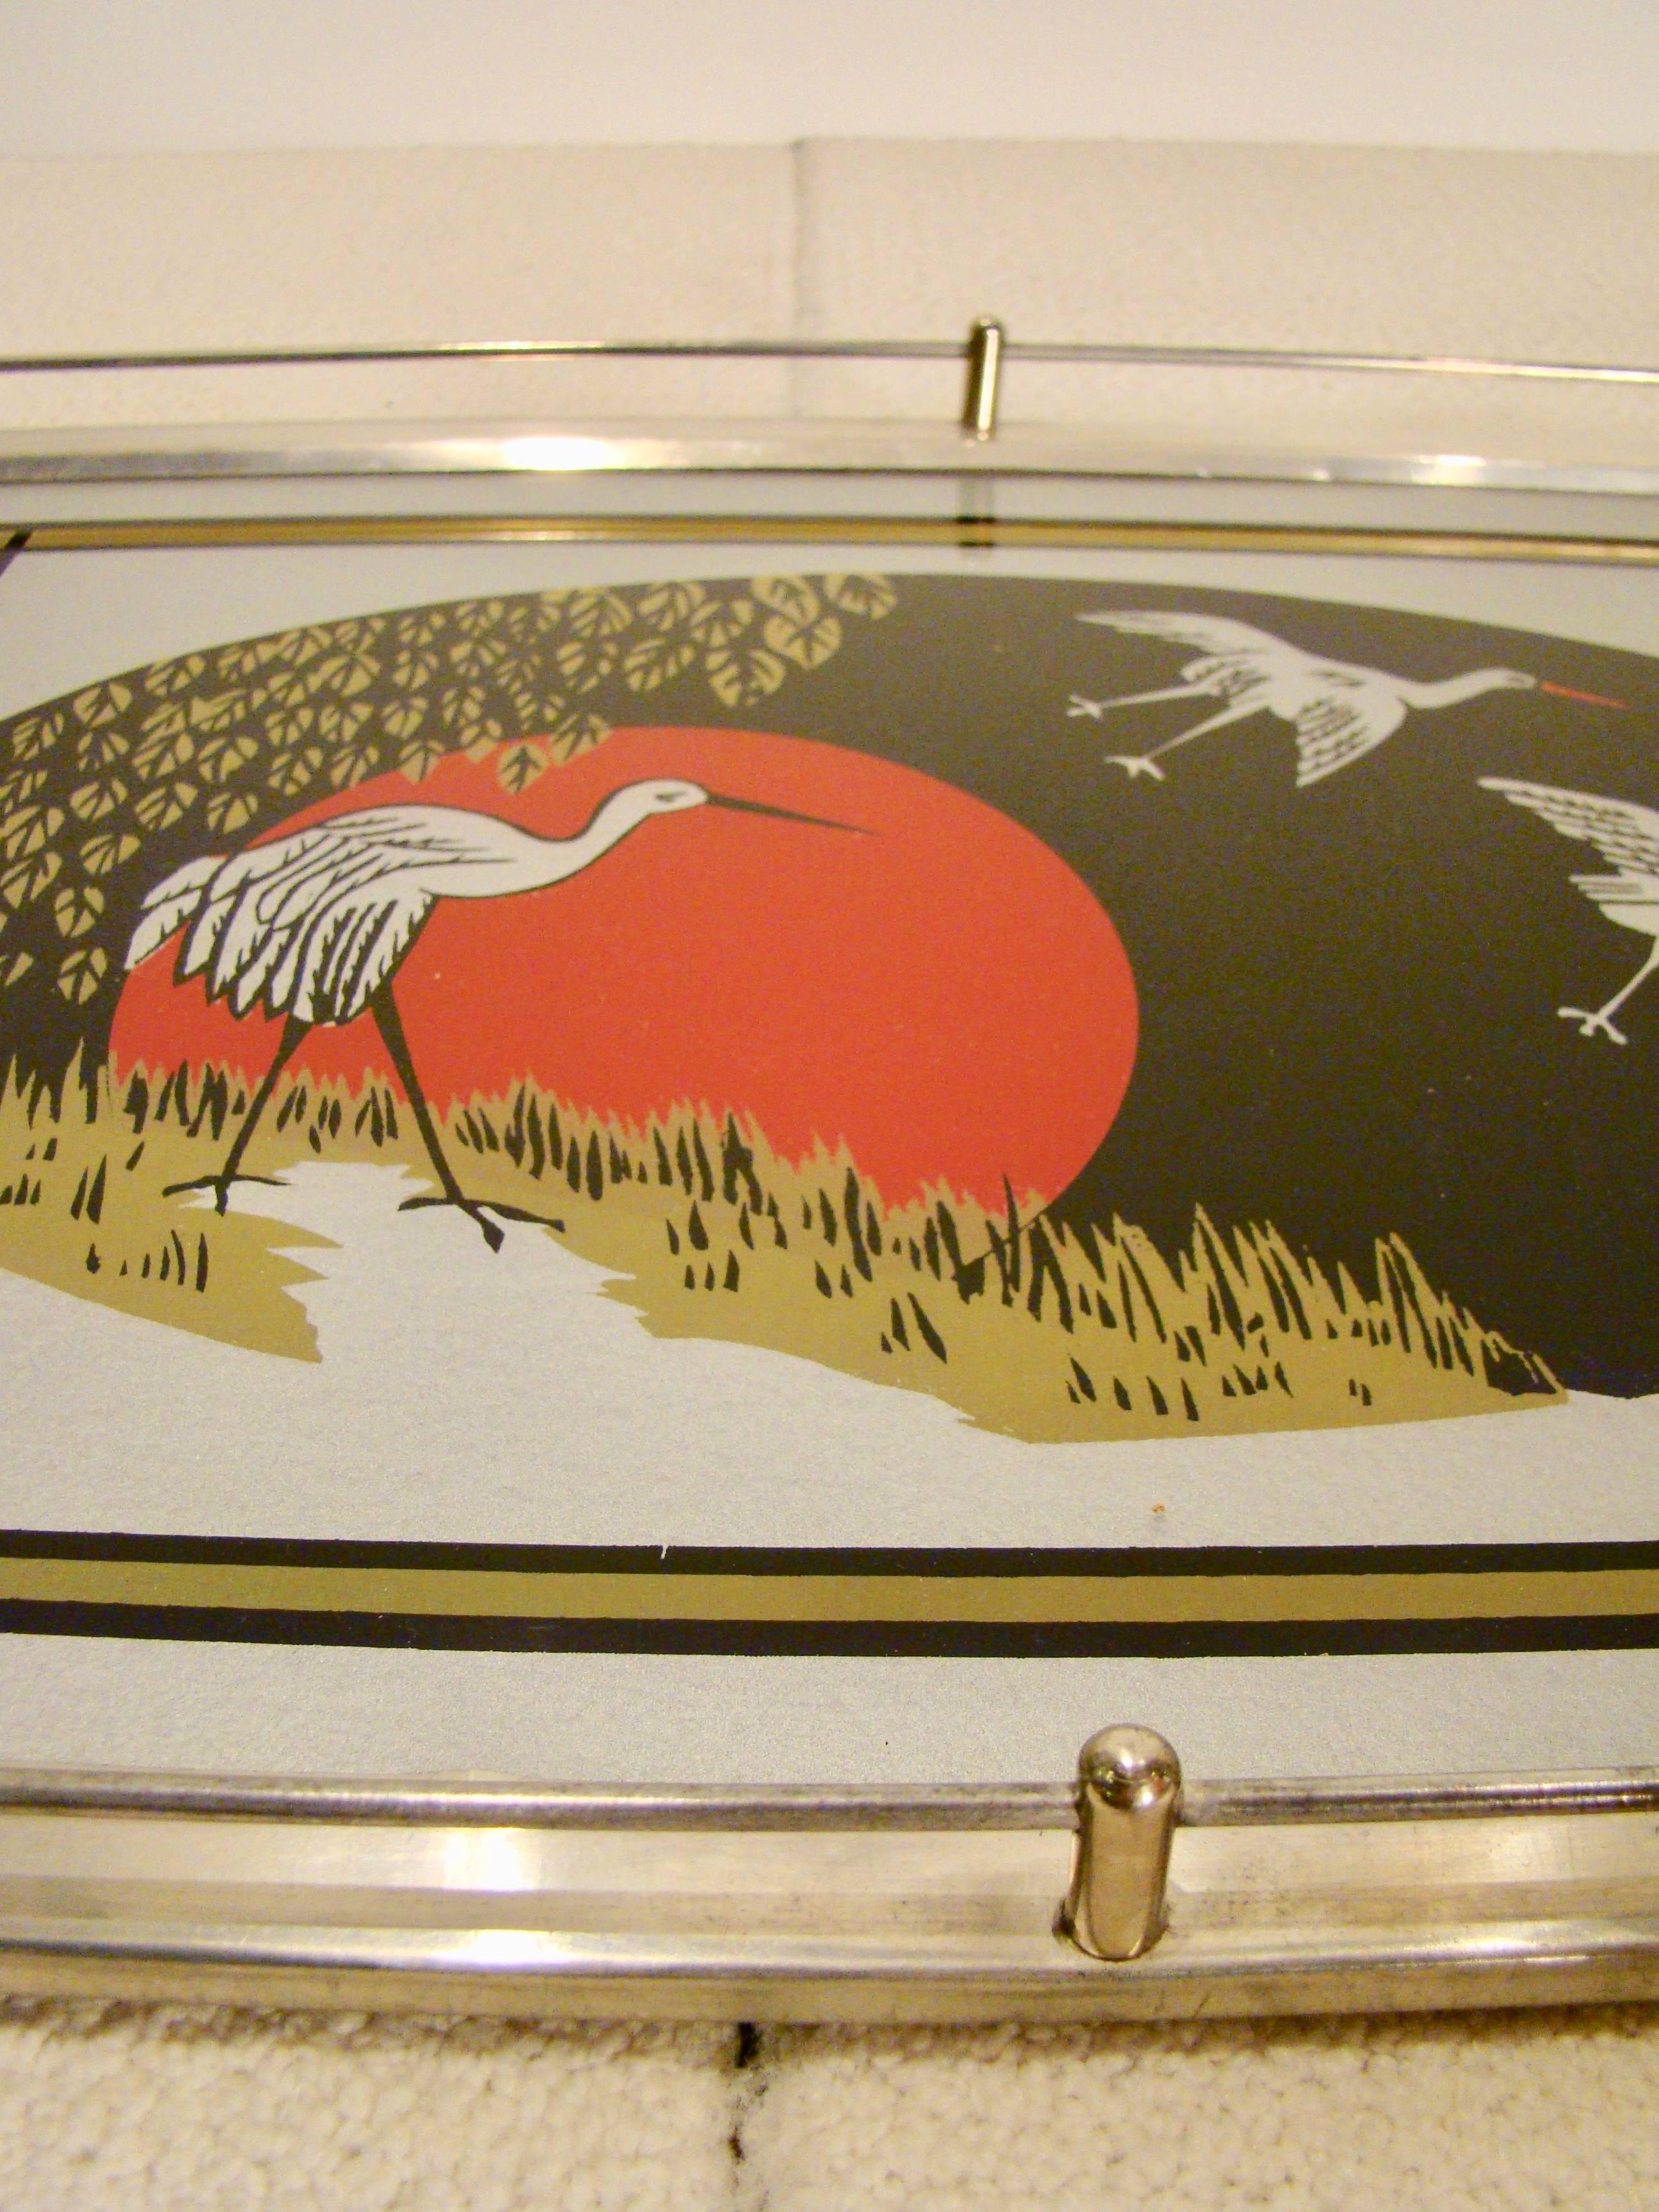 Mid-20th Century Art Deco Reverse Painted Glass and Chrome Cocktail Tray with Cranes